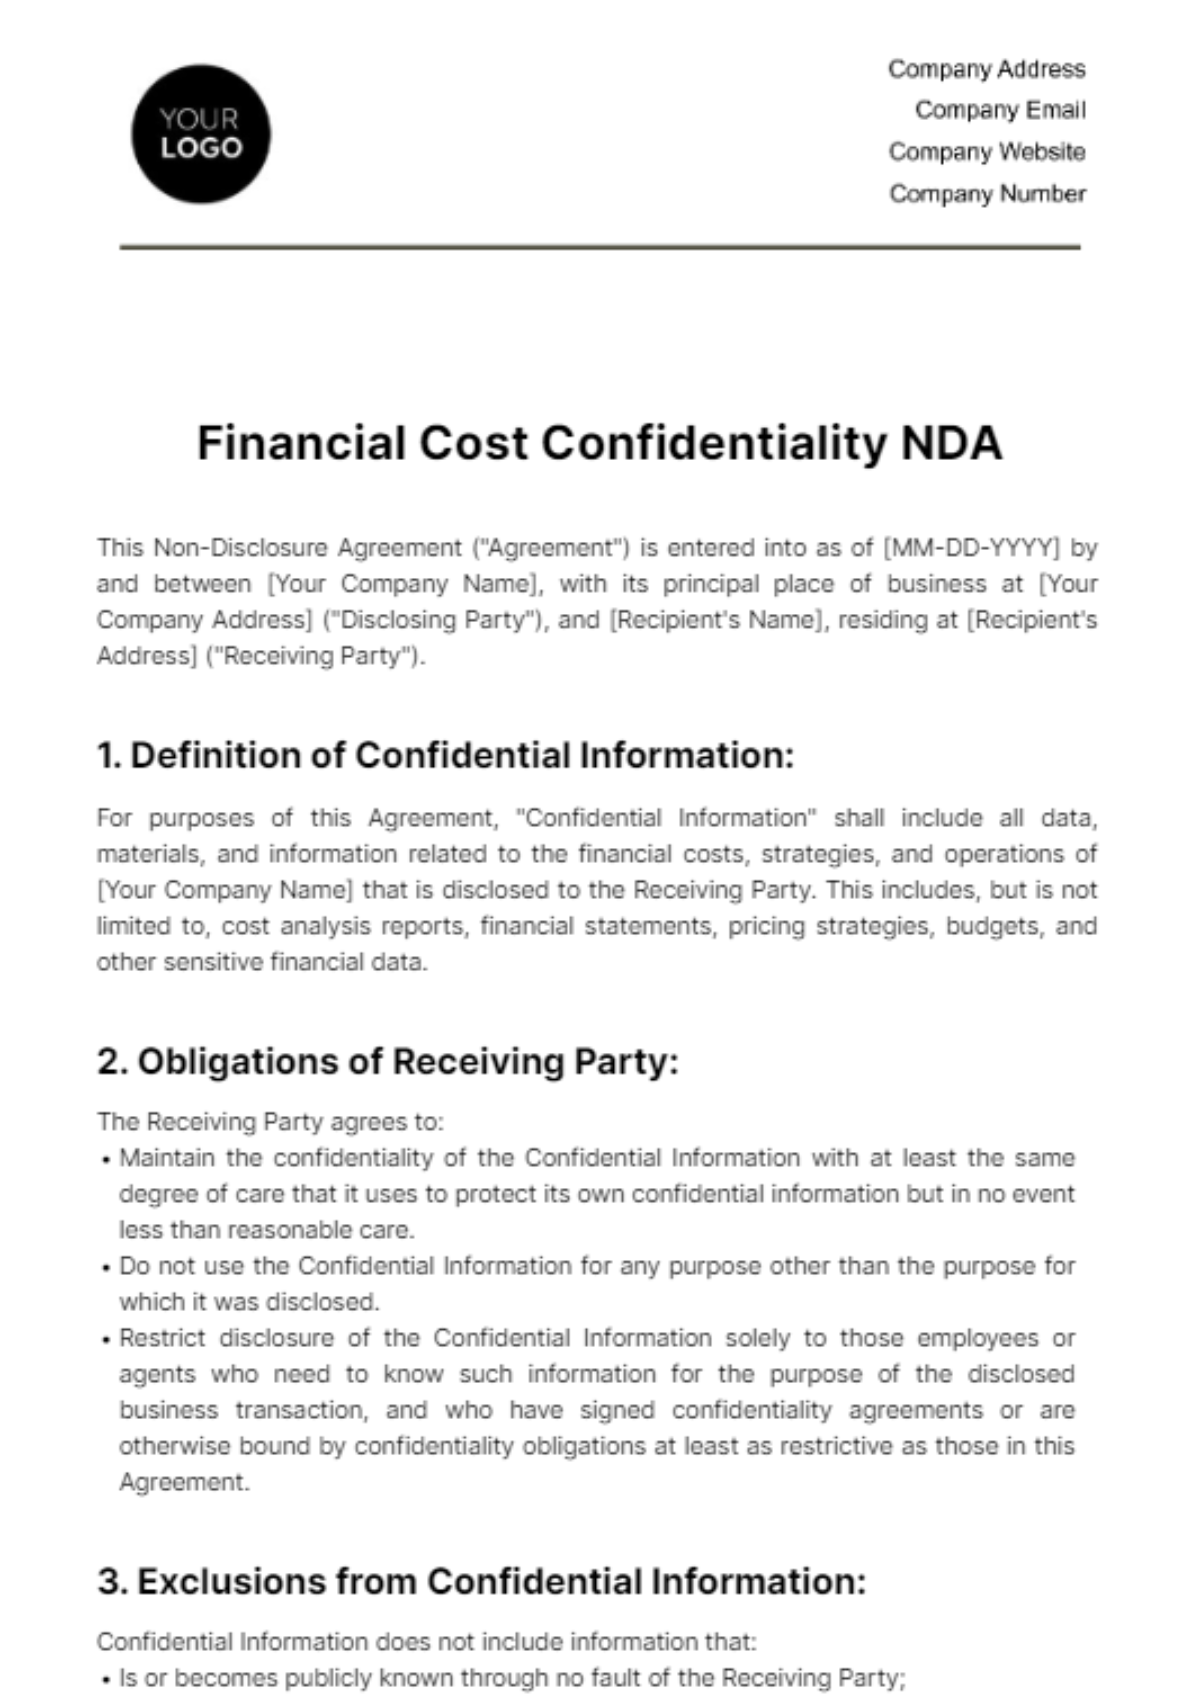 Free Financial Cost Confidentiality NDA Template